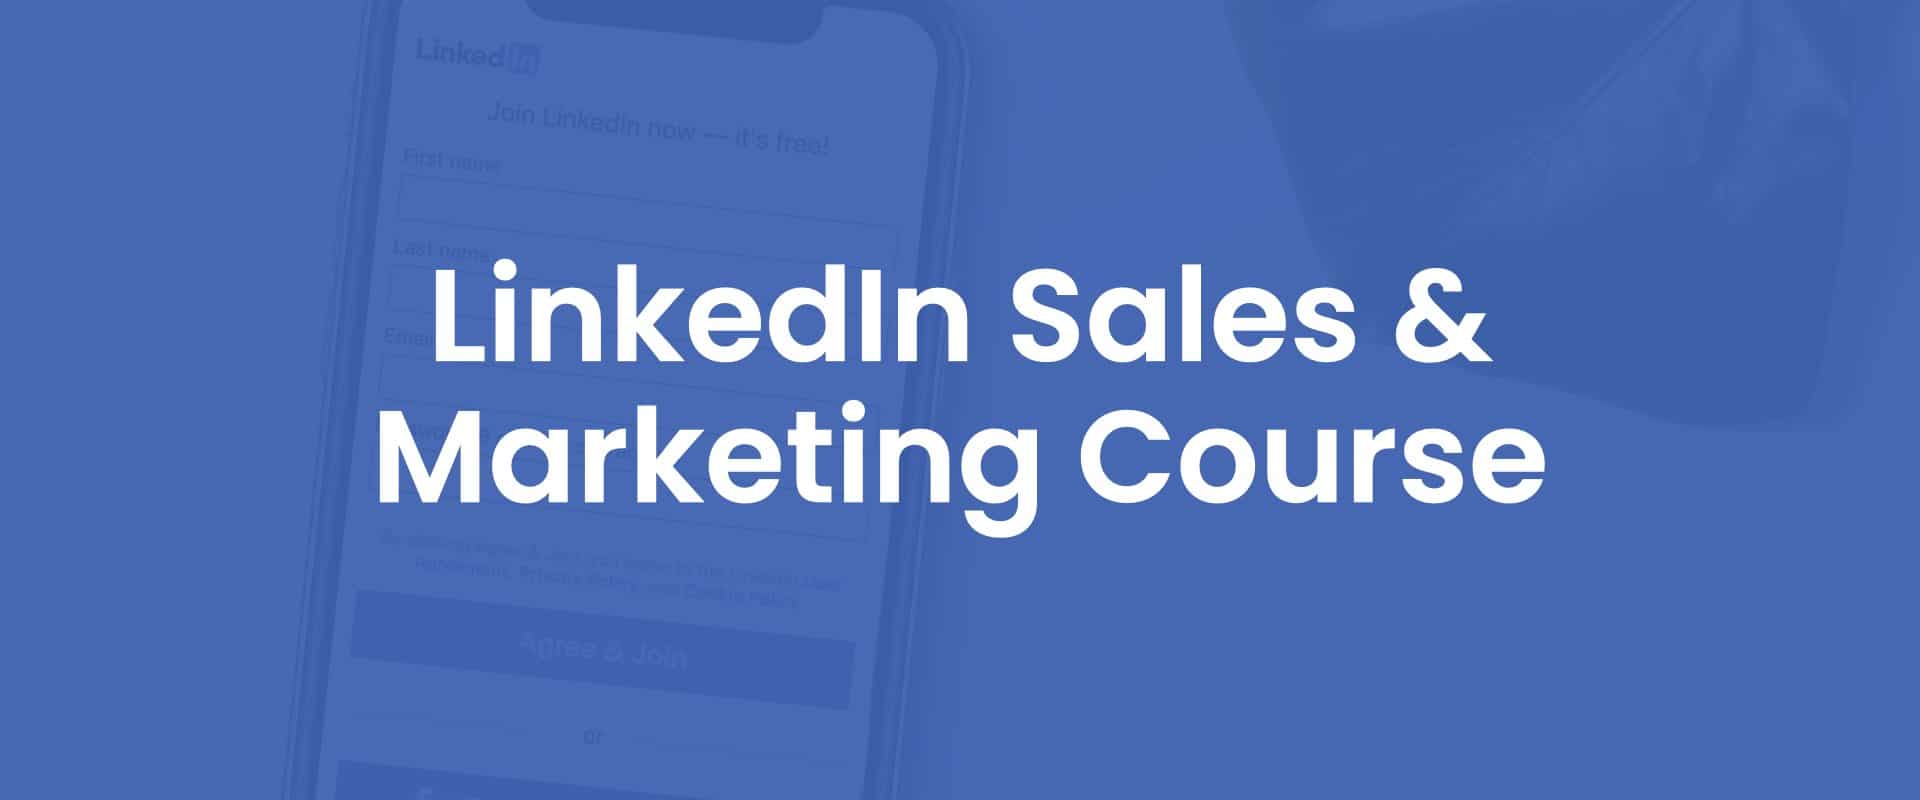 Linkedin Sales and Marketing Course Schedules Cover Image